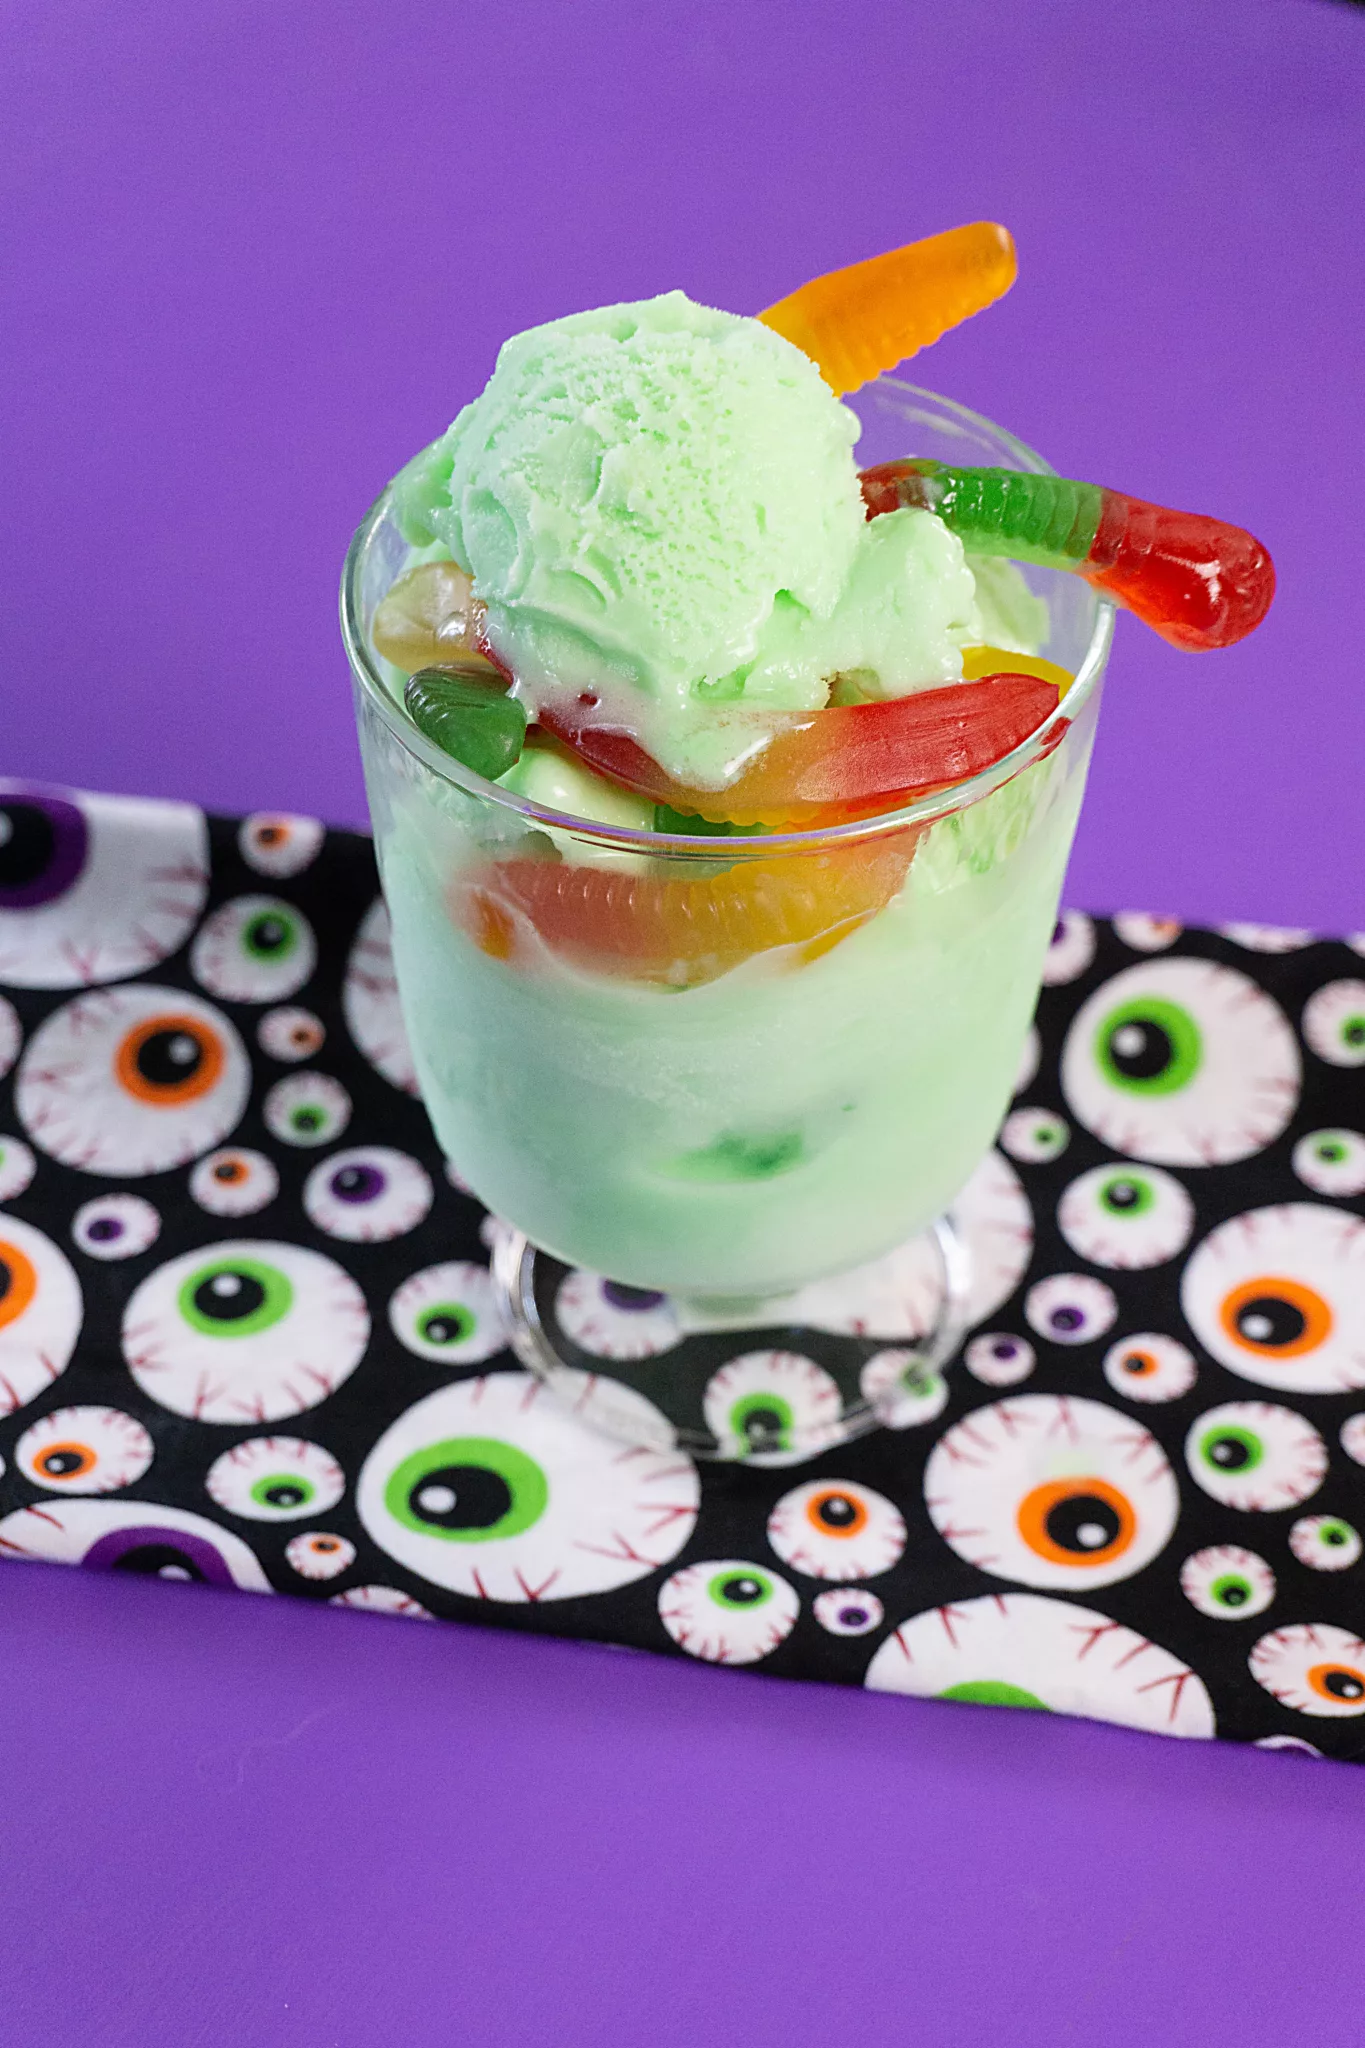 green sorbet with gummy worms in a dessert dish